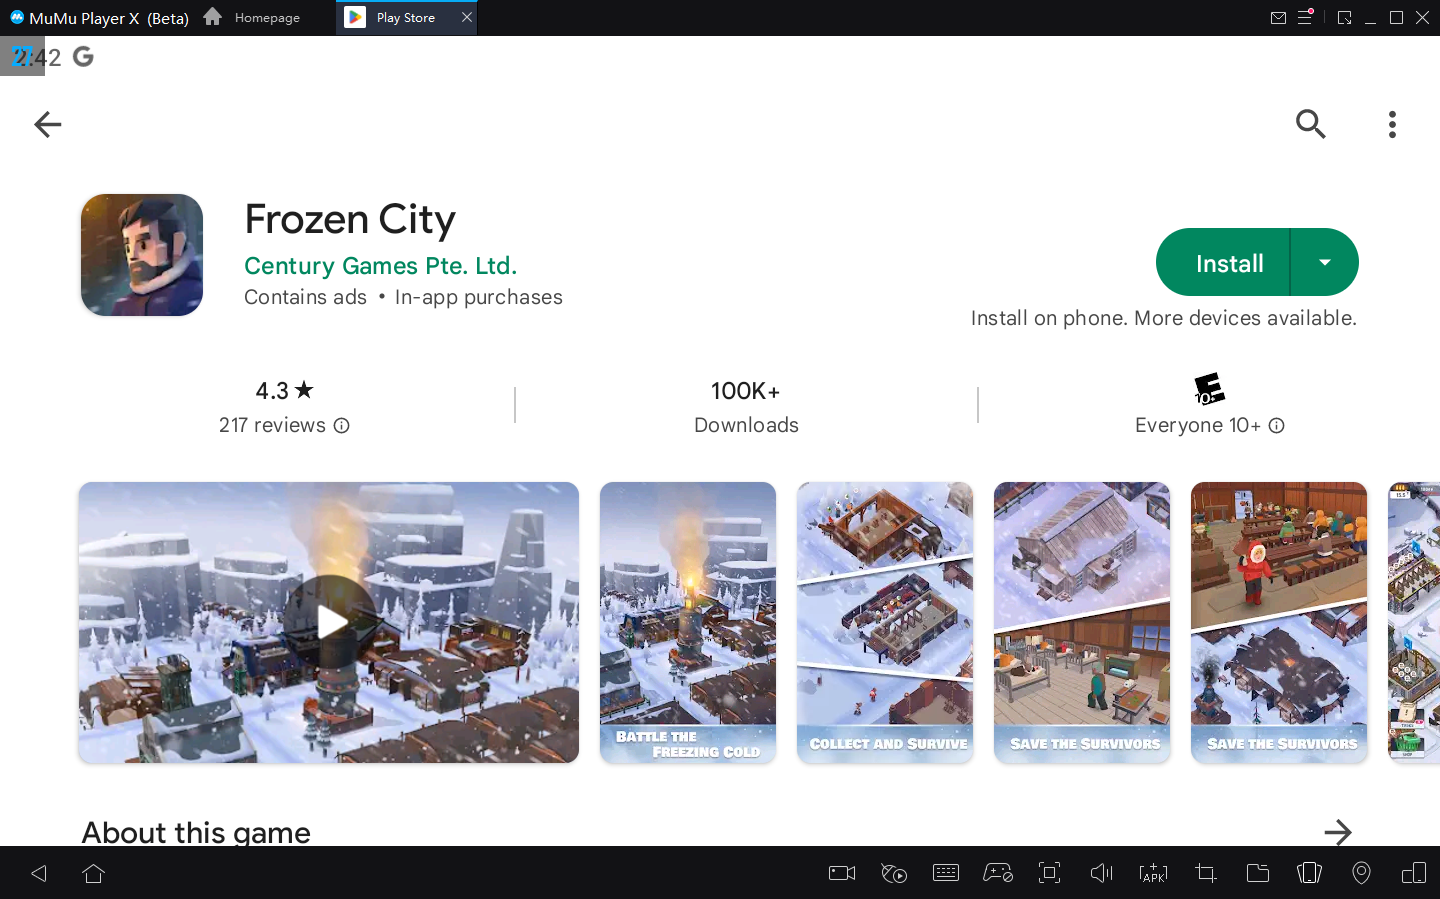 How to Play Frozen City on PC with MuMu Player X